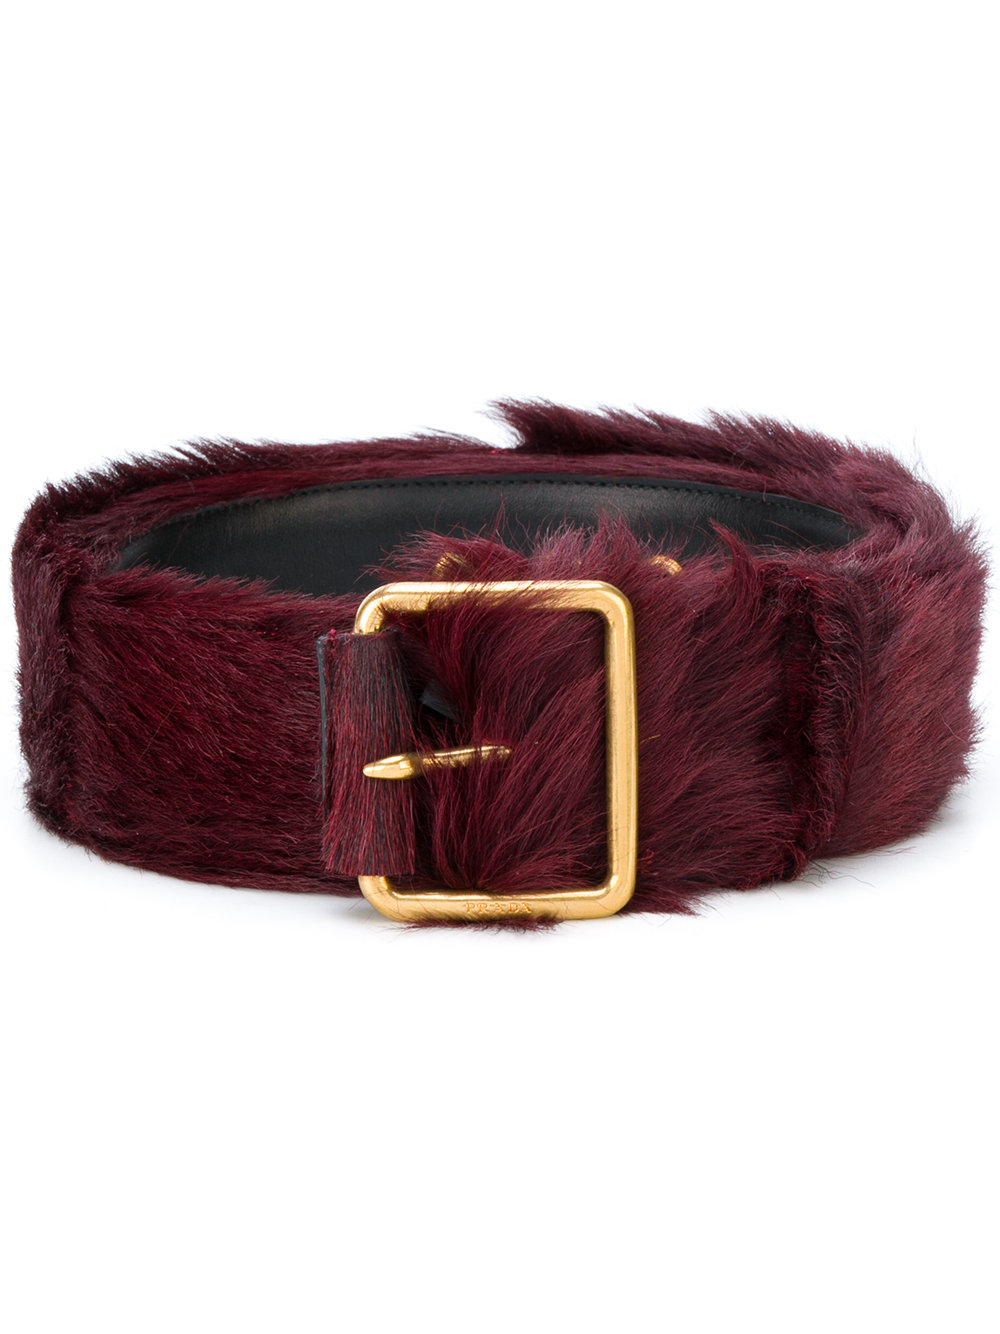 BELTS | THE BOUTIQUE UNTITLED